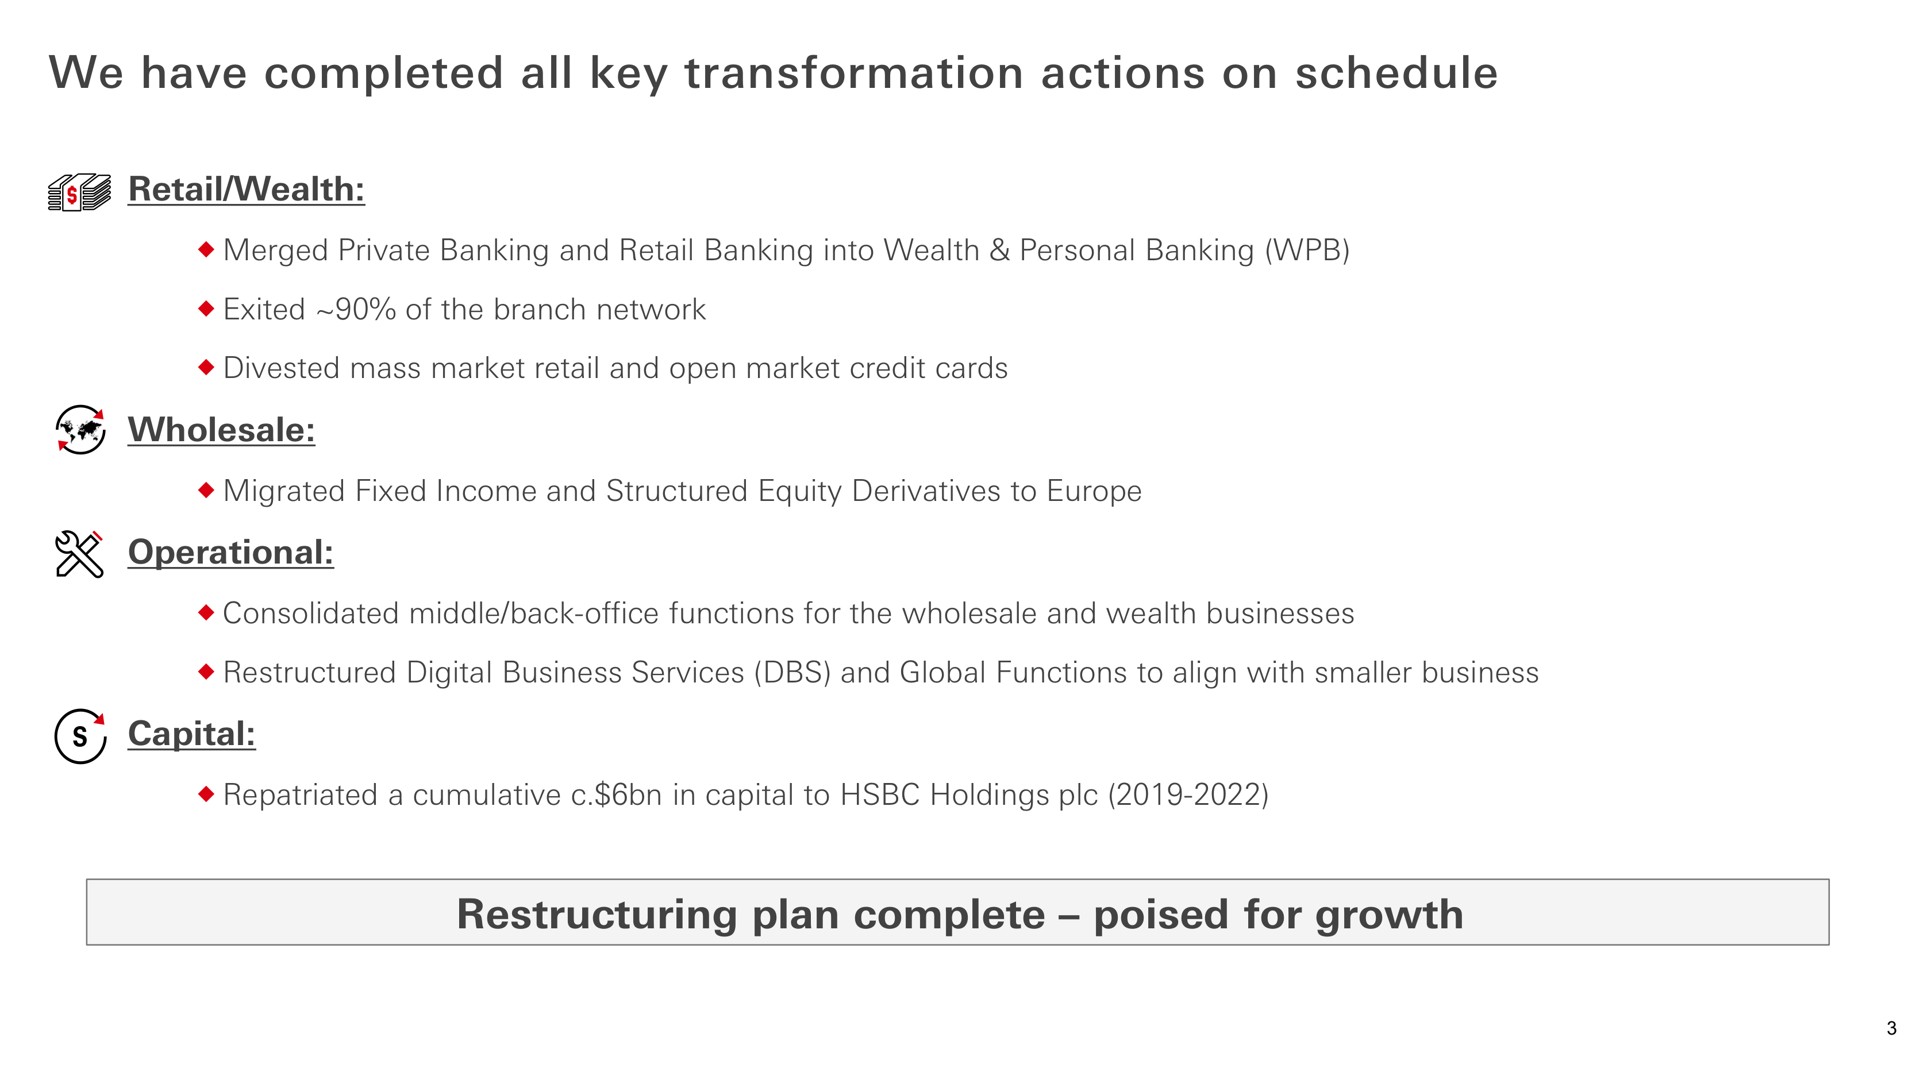 we have completed all key transformation actions on schedule retail wealth merged private banking and retail banking into wealth personal banking exited of the branch network divested mass market retail and open market credit cards wholesale migrated fixed income and structured equity derivatives to operational consolidated middle back office functions for the wholesale and wealth businesses digital business services and global functions to align with smaller business capital repatriated a cumulative in capital to holdings plan complete poised for growth | HSBC